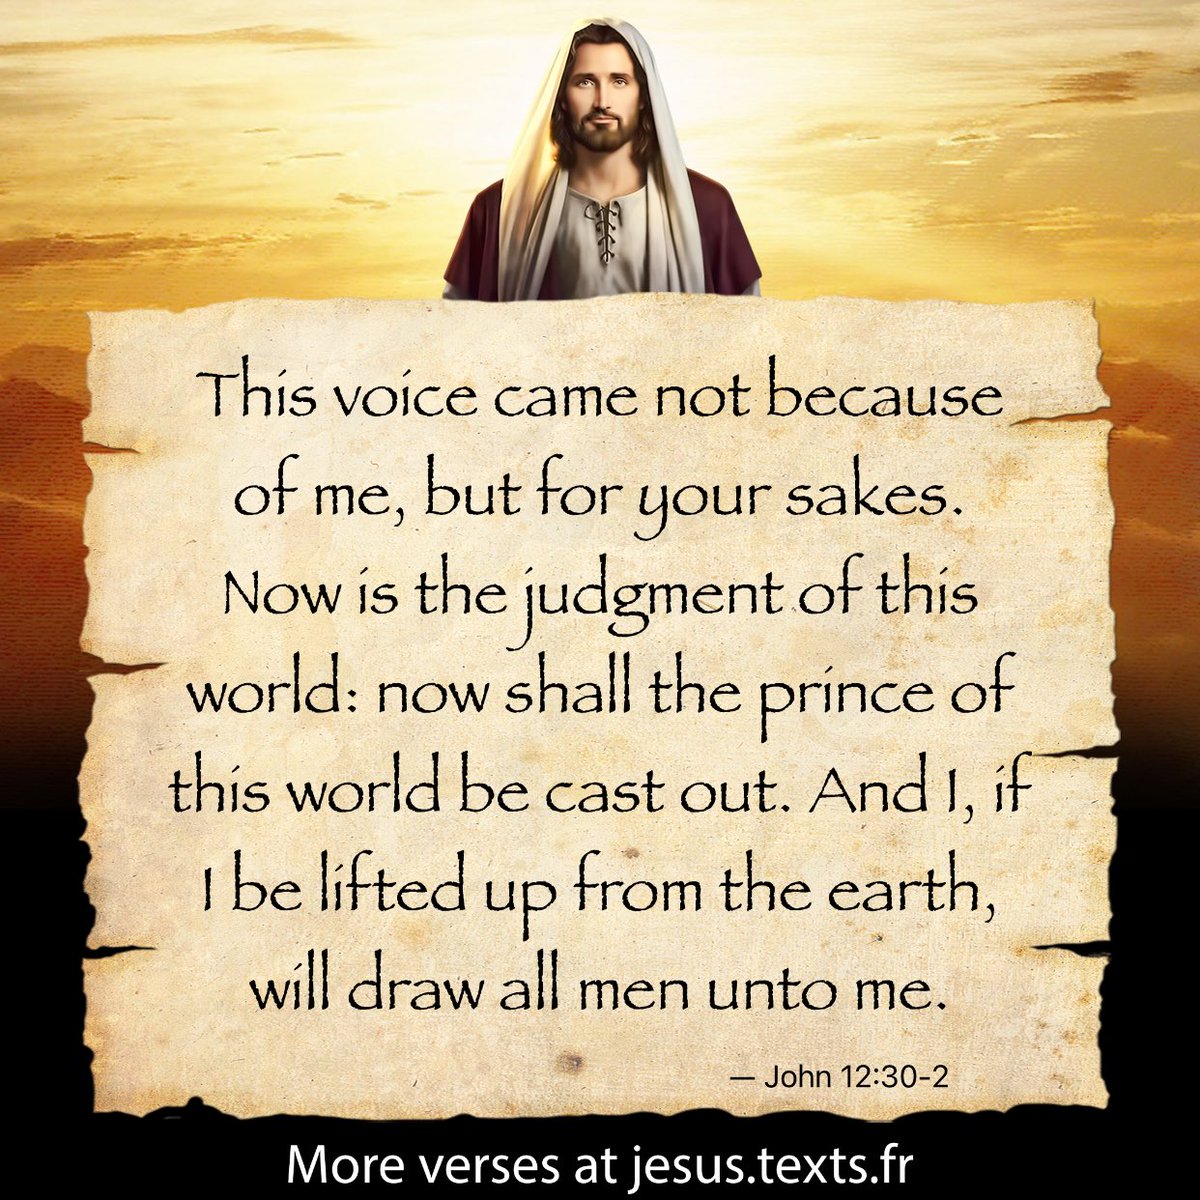 “This voice came not because of me, but for your sakes. Now is the judgment of this world: now shall the prince of this world be cast out. And I, if I be lifted up from the earth, will draw all men unto me.” txf.ro/m/jf294 #jesus